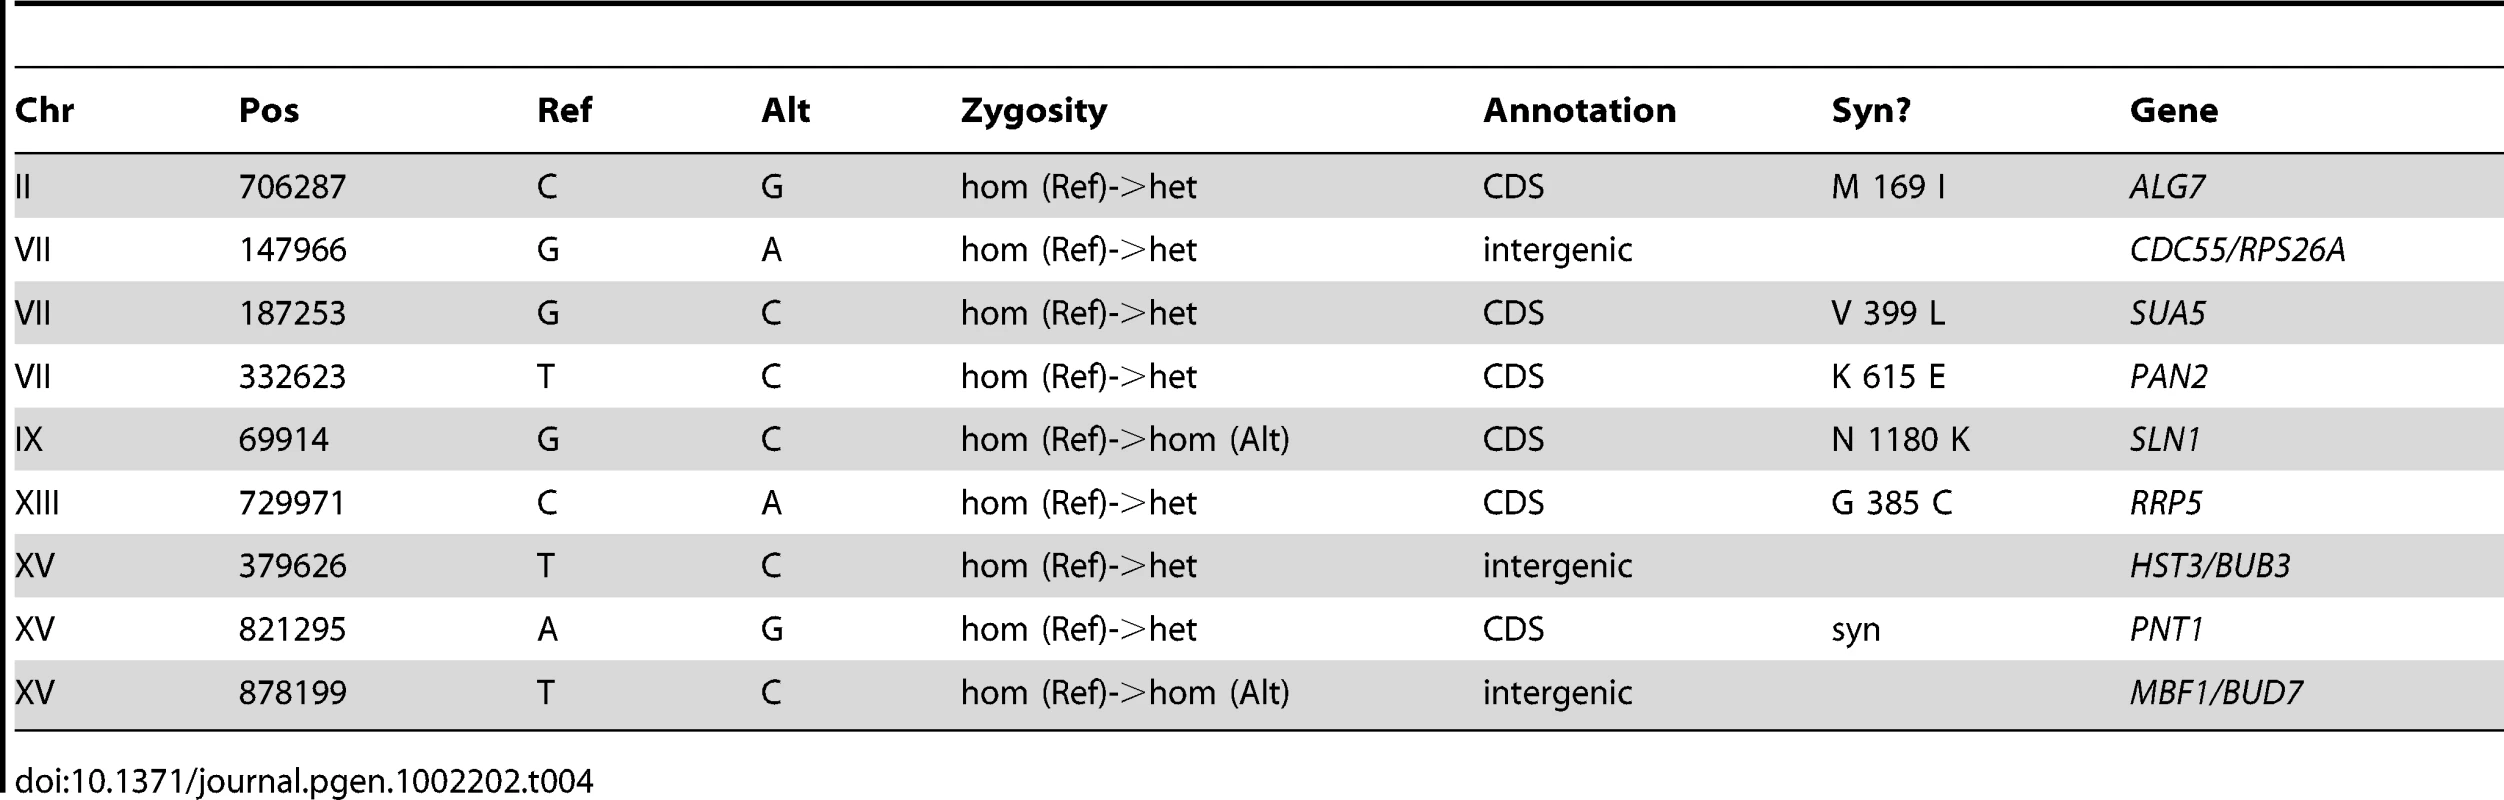 Summary of Substitutions and Indels for E4 (301 generations).